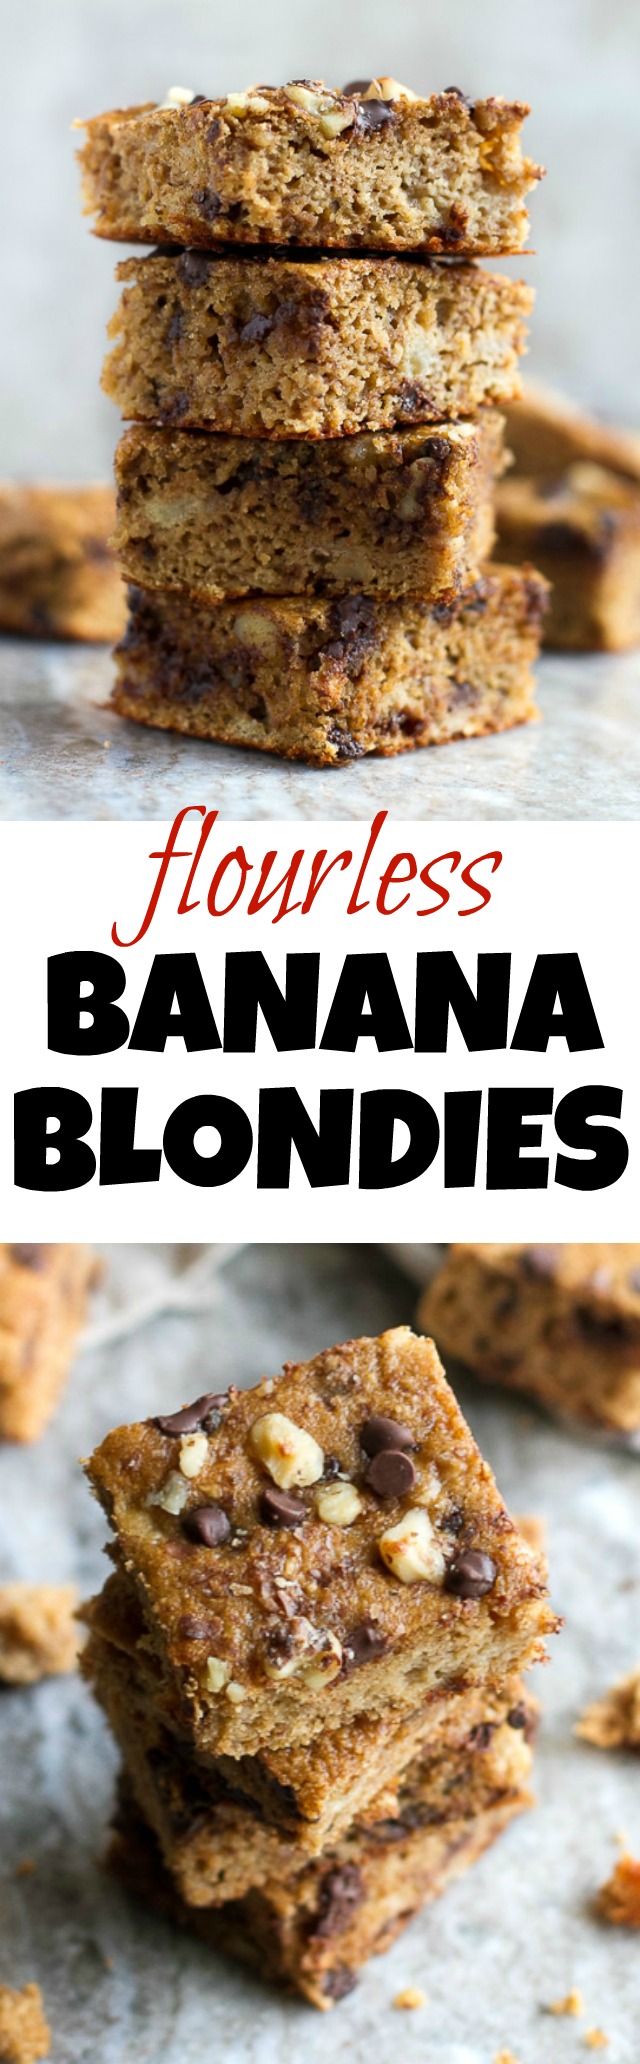 You won't find any flour, butter, or oil in these ridiculously soft and tender Flourless Banana Blondies! They're naturally gluten-free, and come out to less than 100 delicious calories per serving! | runningwithspoons.com #recipe #healthy #desserts